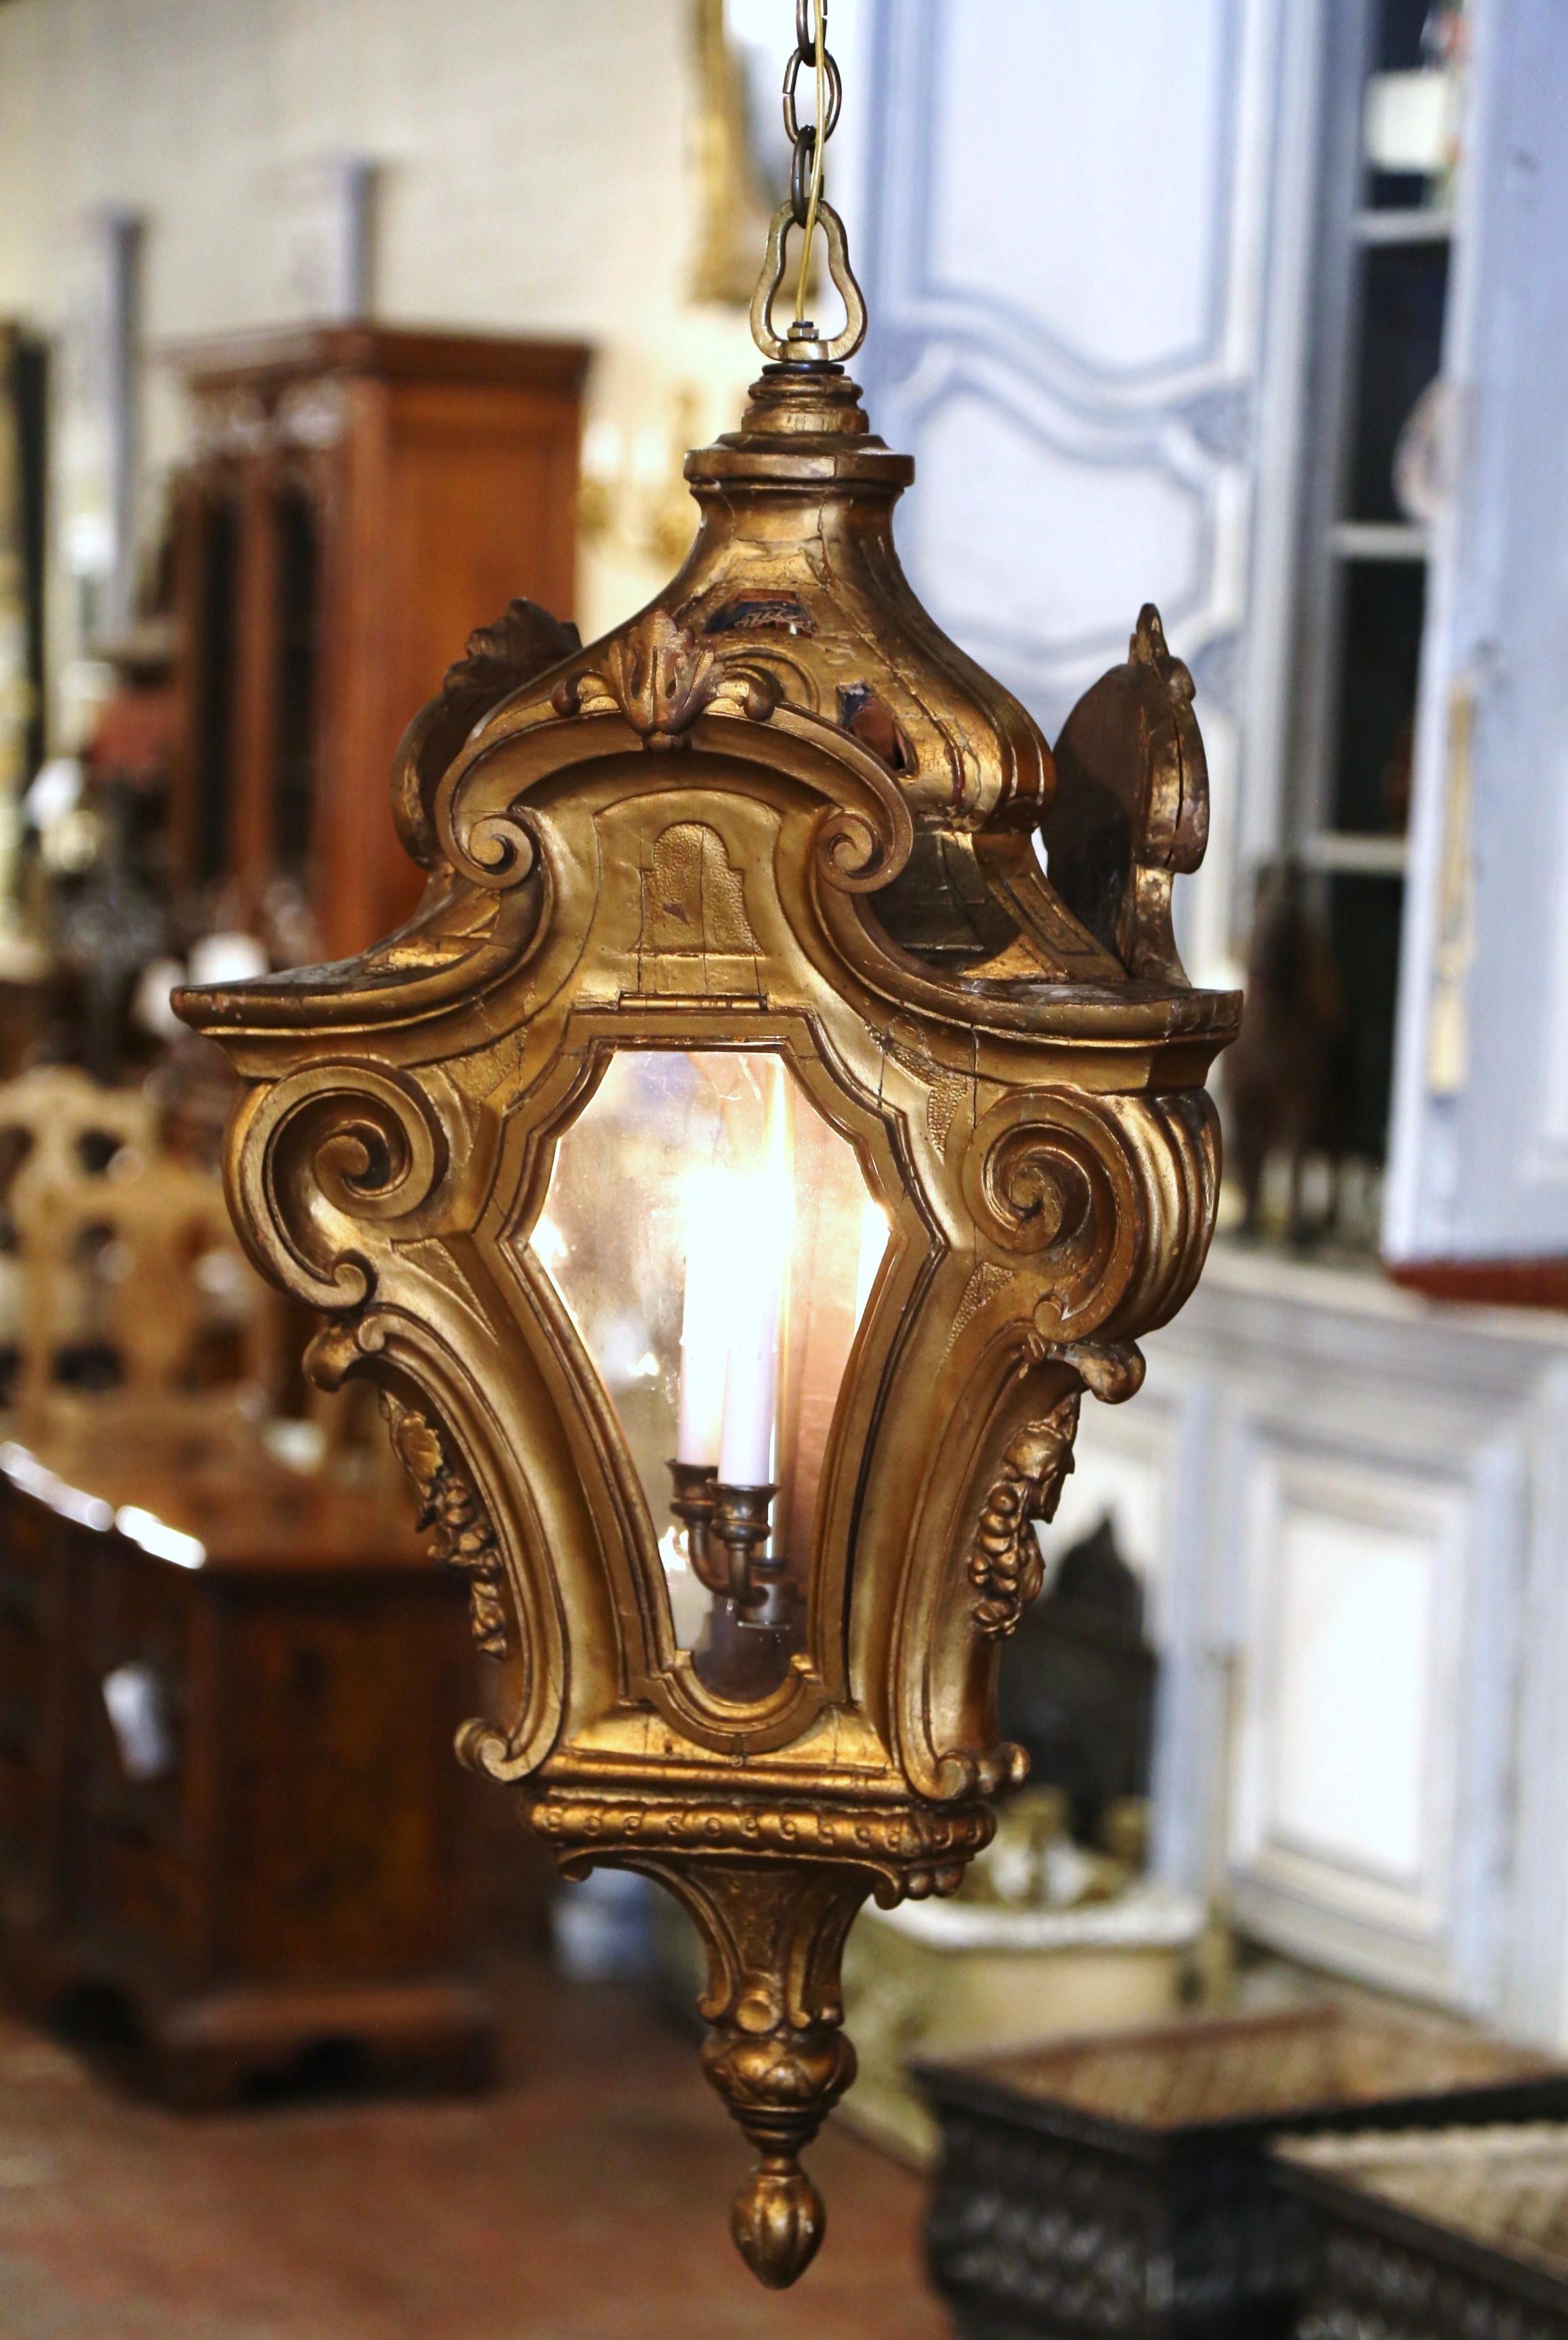 Bring Classic, Italian elegance into your home with this large Rococo hand carved hall lantern. Crafted in Italy, circa 1760, this traditional polygon light fixture is a true showstopper. The wooden lantern with dome top and scroll decor, has